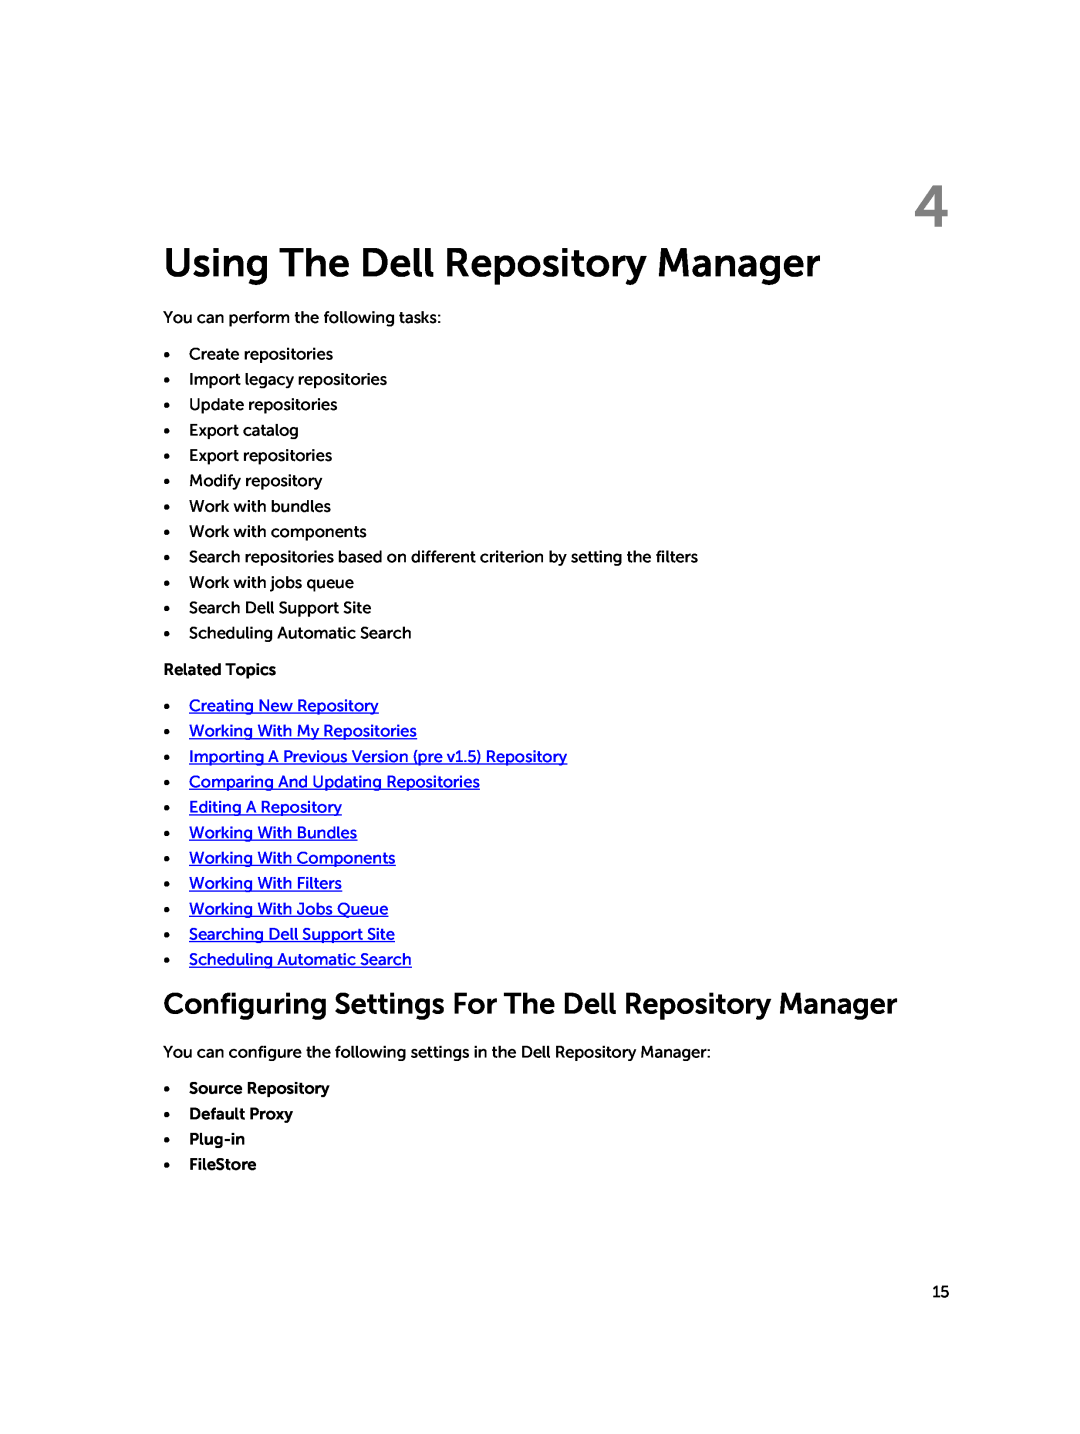 Dell 1.8 Using The Dell Repository Manager, Creating New Repository, Working With My Repositories, Working With Jobs Queue 